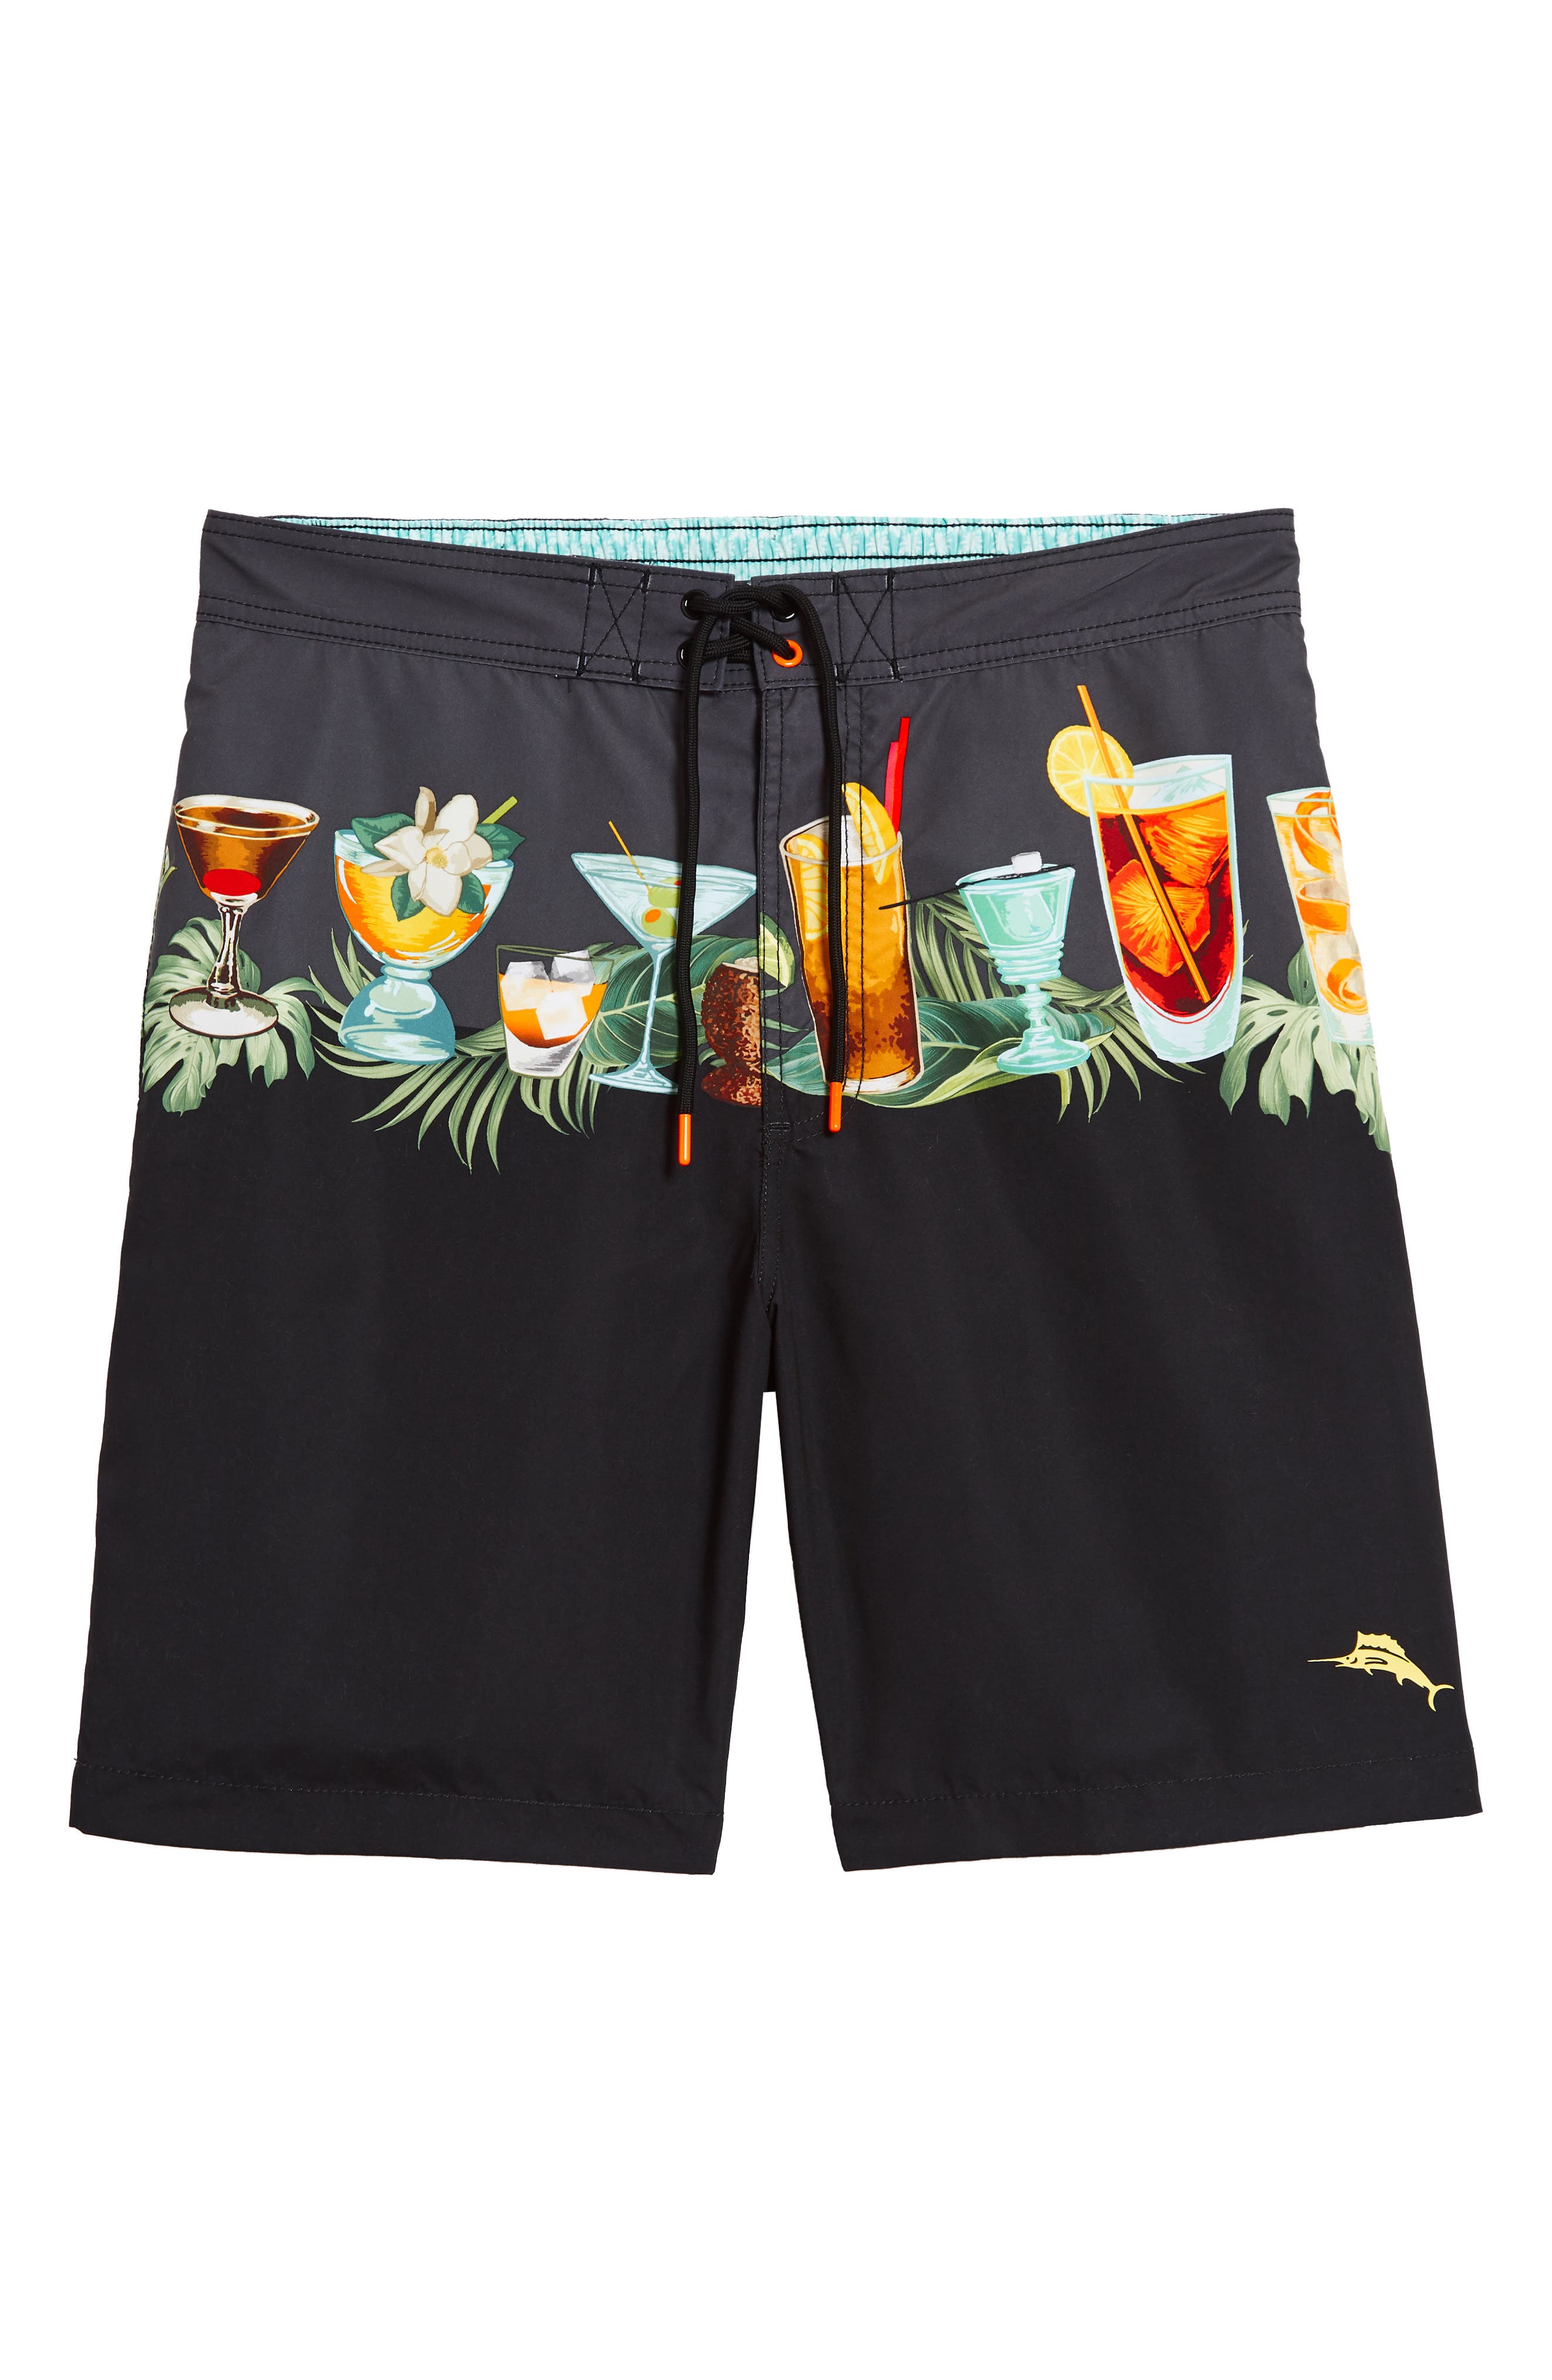 tommy bahama men's swimsuits